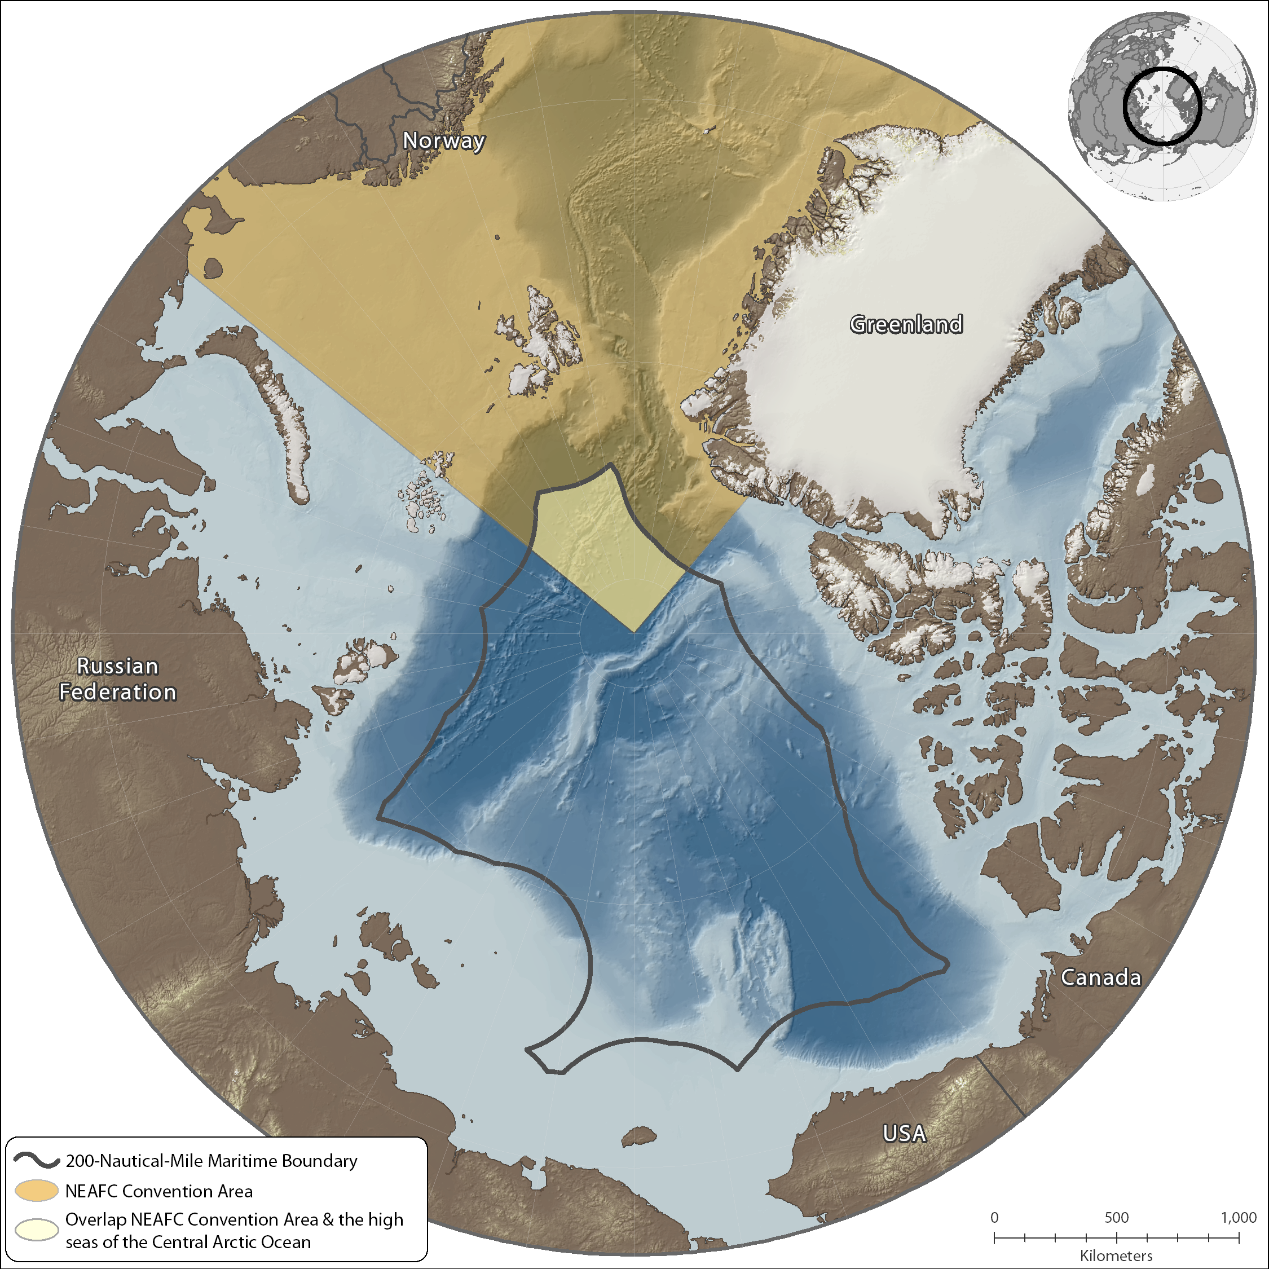 The map highlights the 200-Nautical-Mile Maritime Boundary in the arctic, as well as the NEAFC Convention Area, and where the high seas and the NEAFC-area overlap.